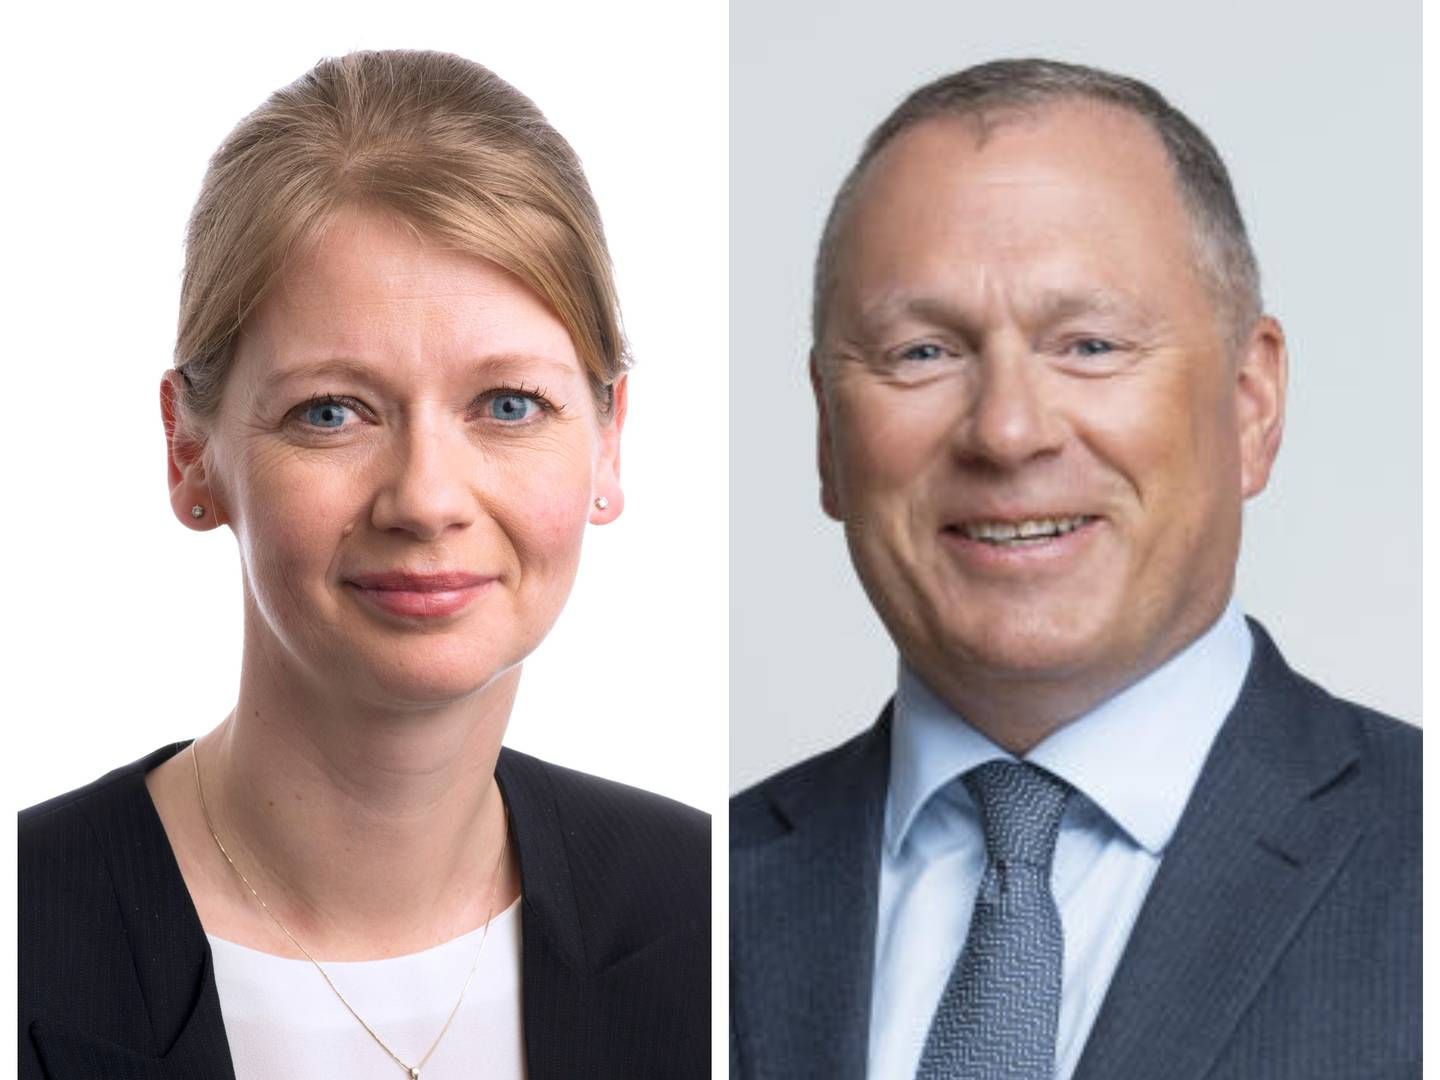 The governor of Norges Bank, Ida Wolden Bache, and oil fund CEO Nicolai Tangen are both hoping that the fund will be able to invest in unlisted equities. | Photo: Norges Bank / PR